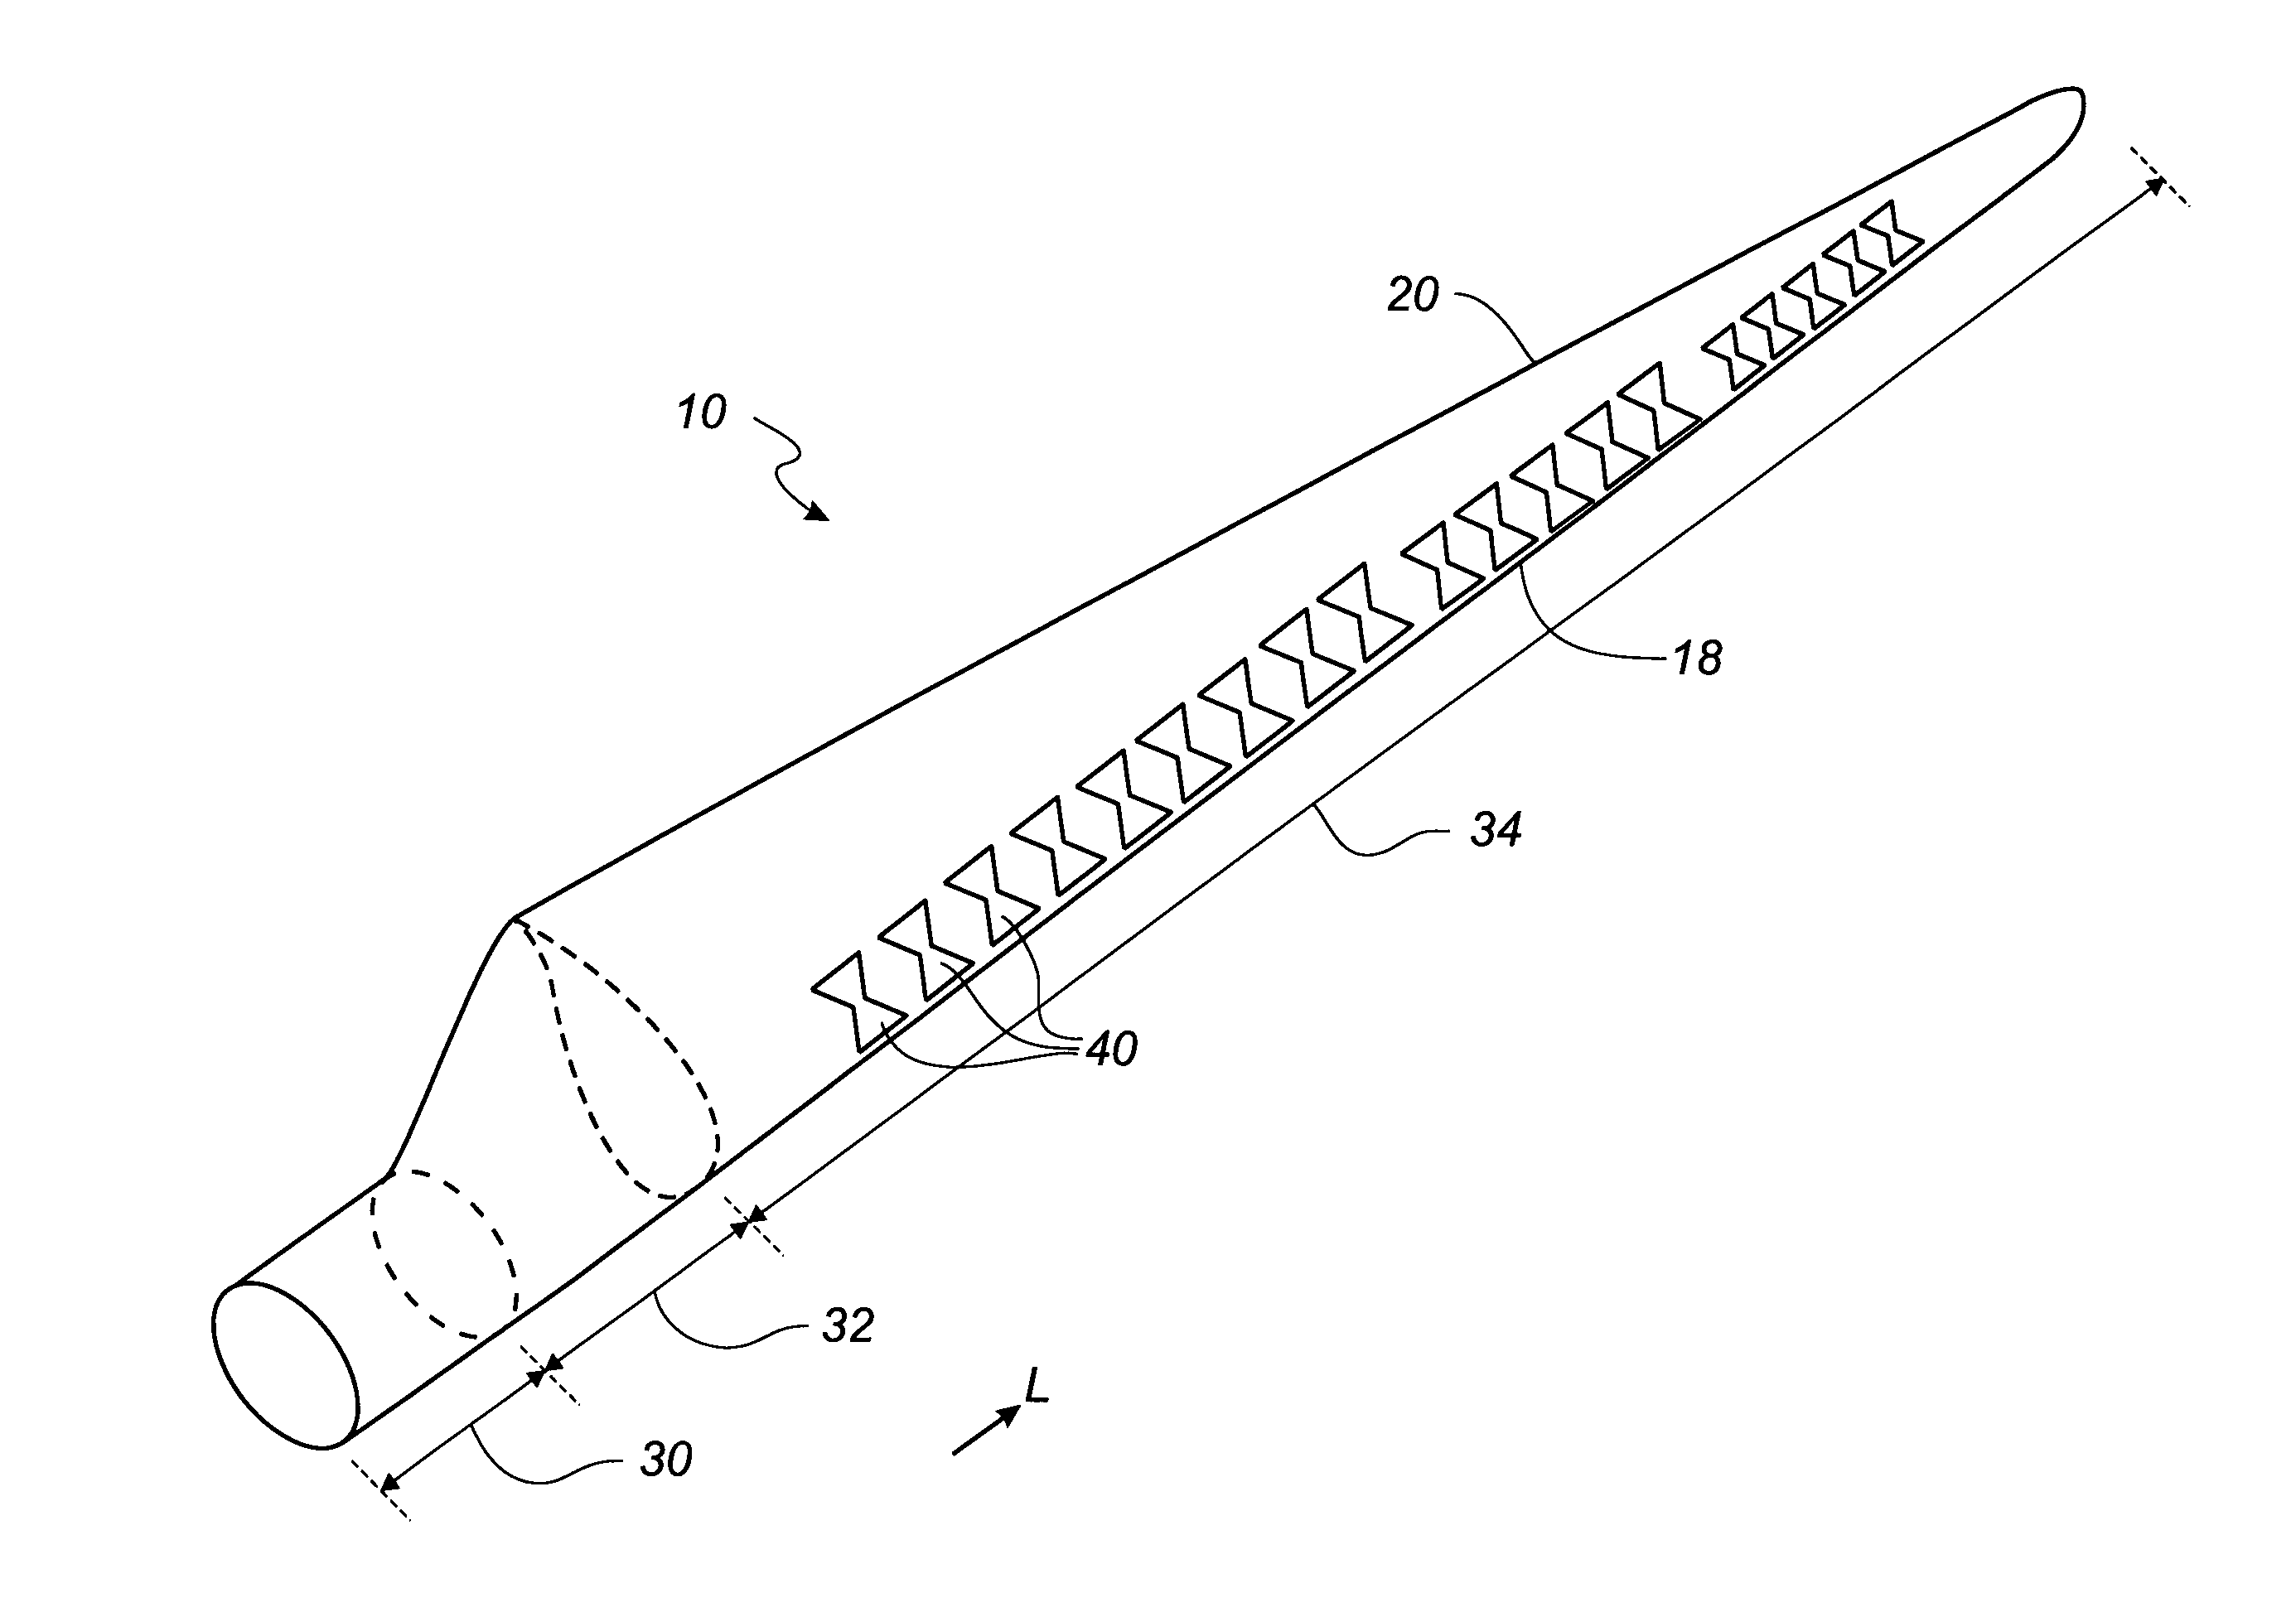 Wind turbine blade with submerged boundary layer control means